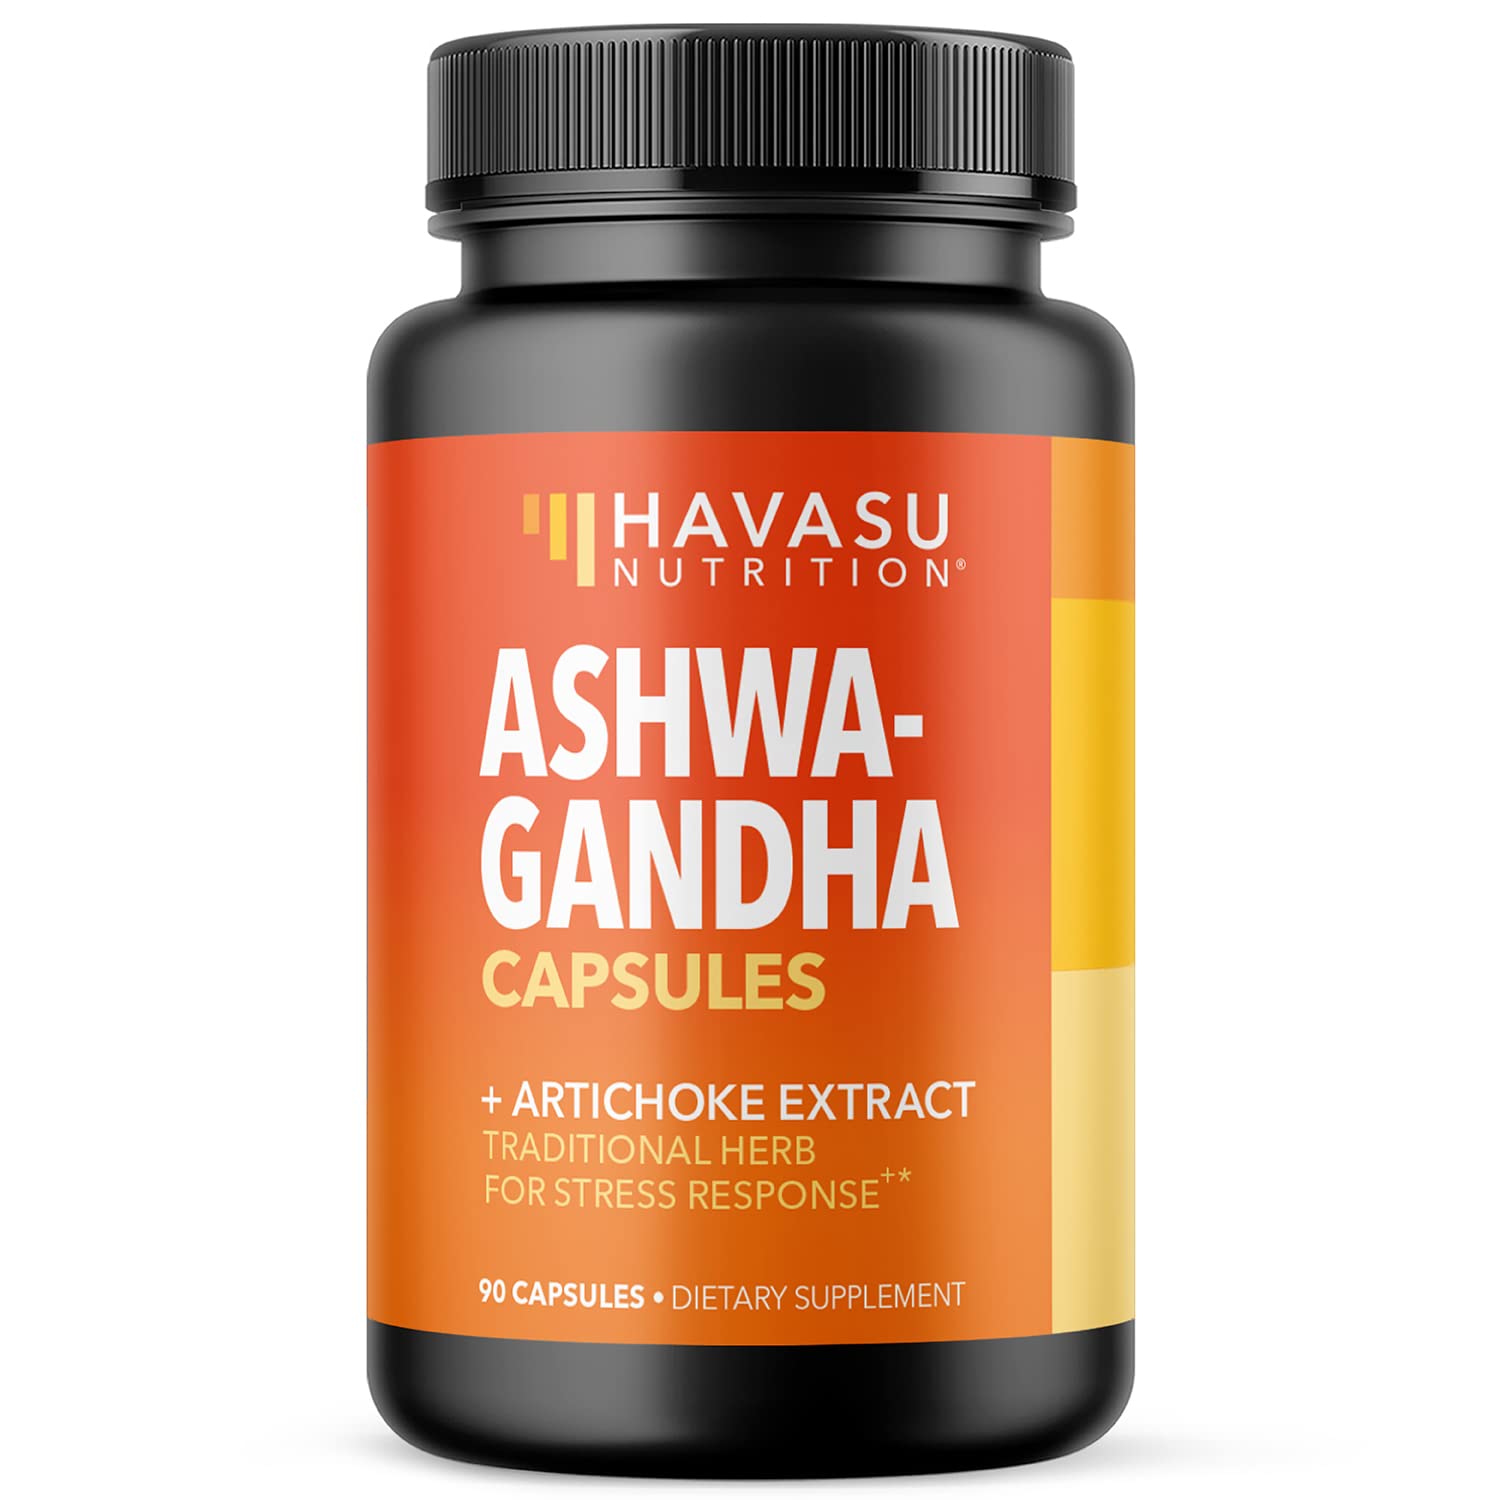 HAVASU NUTRITION Ashwagandha Capsules with Artichoke Extract to Support Stress Response & Mood Support (1000 mg)